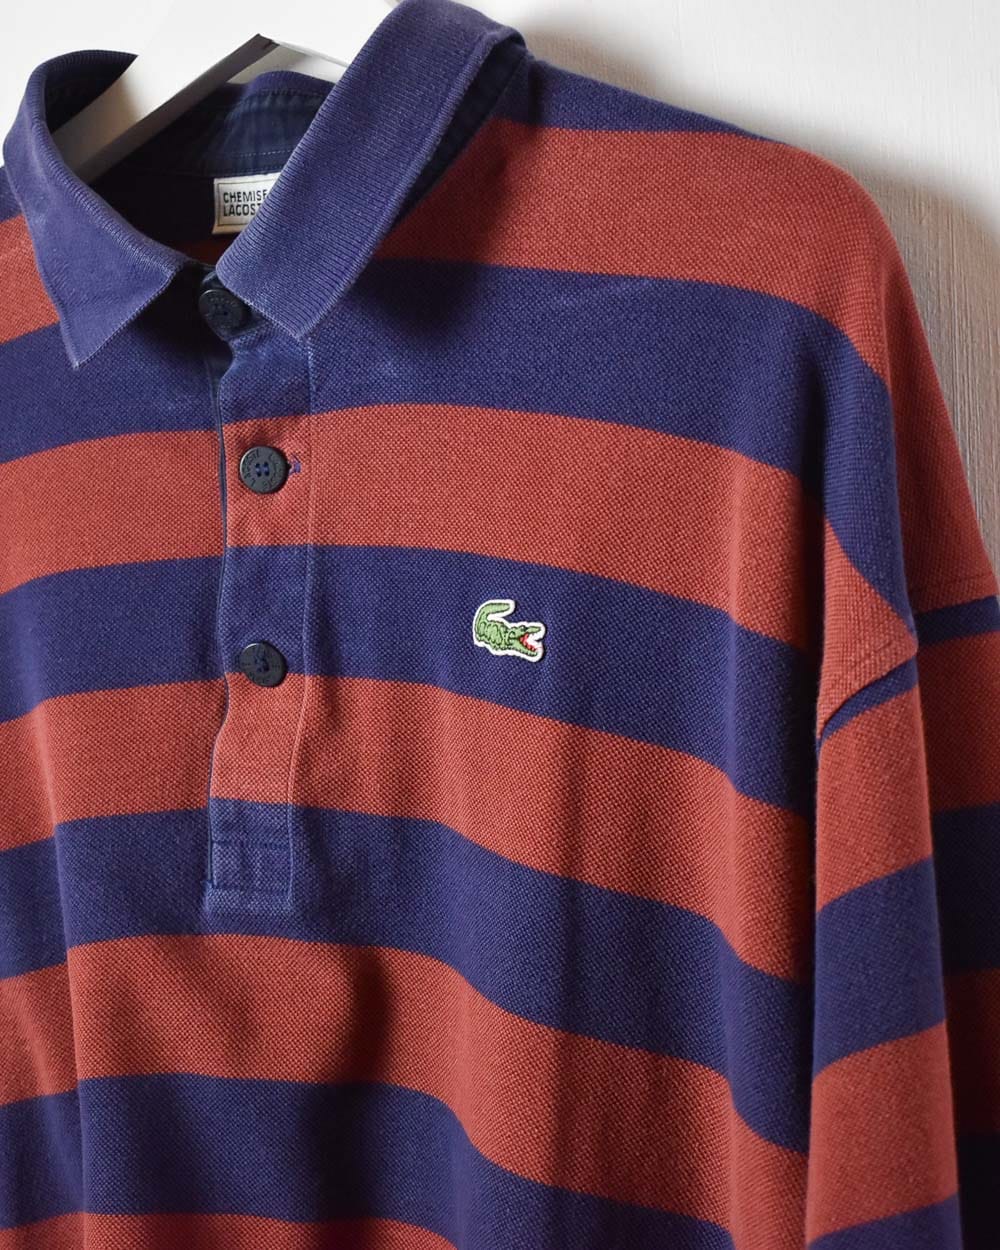 Maroon Chemise Lacoste Striped Rugby Shirt - Medium